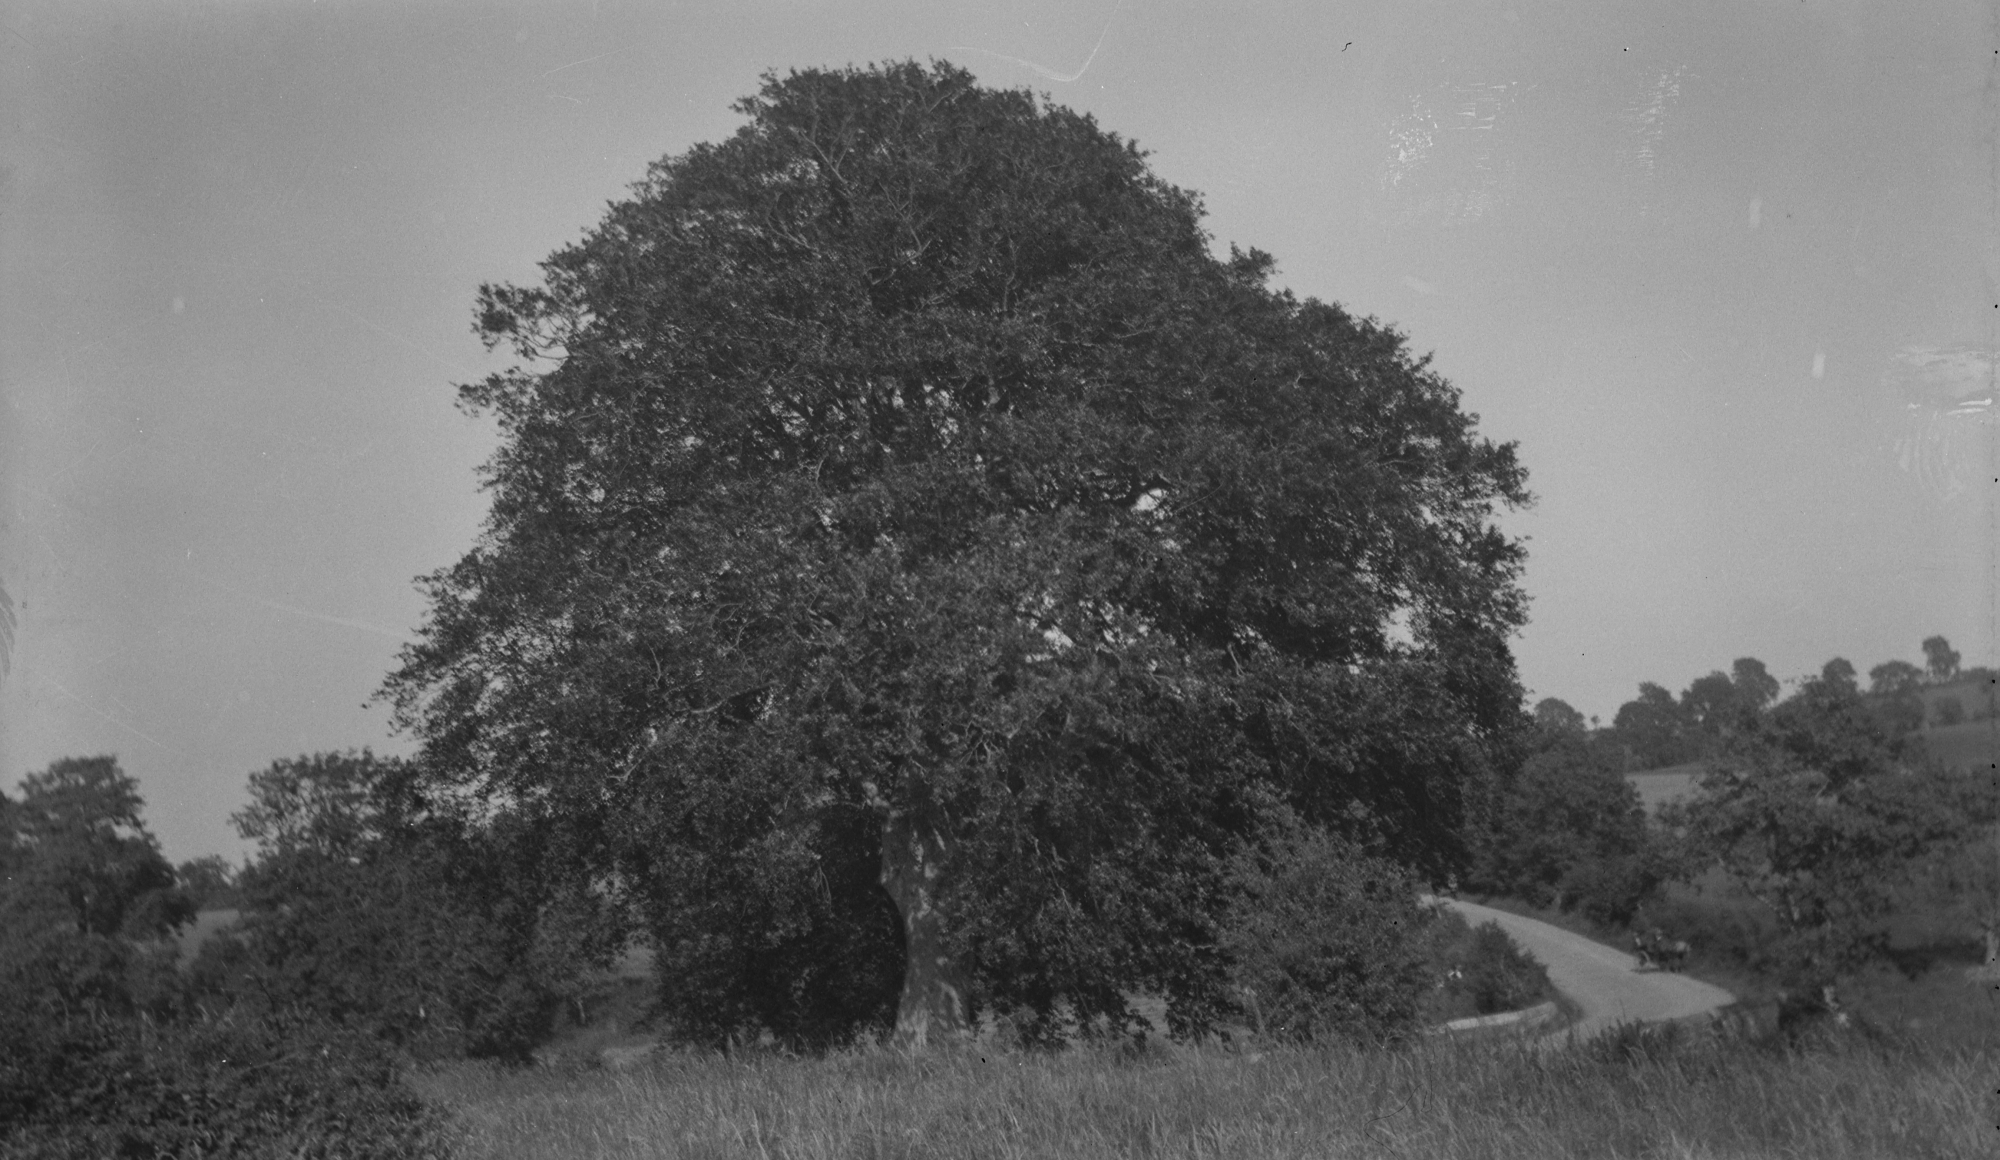 The Beech tree by the Brookes